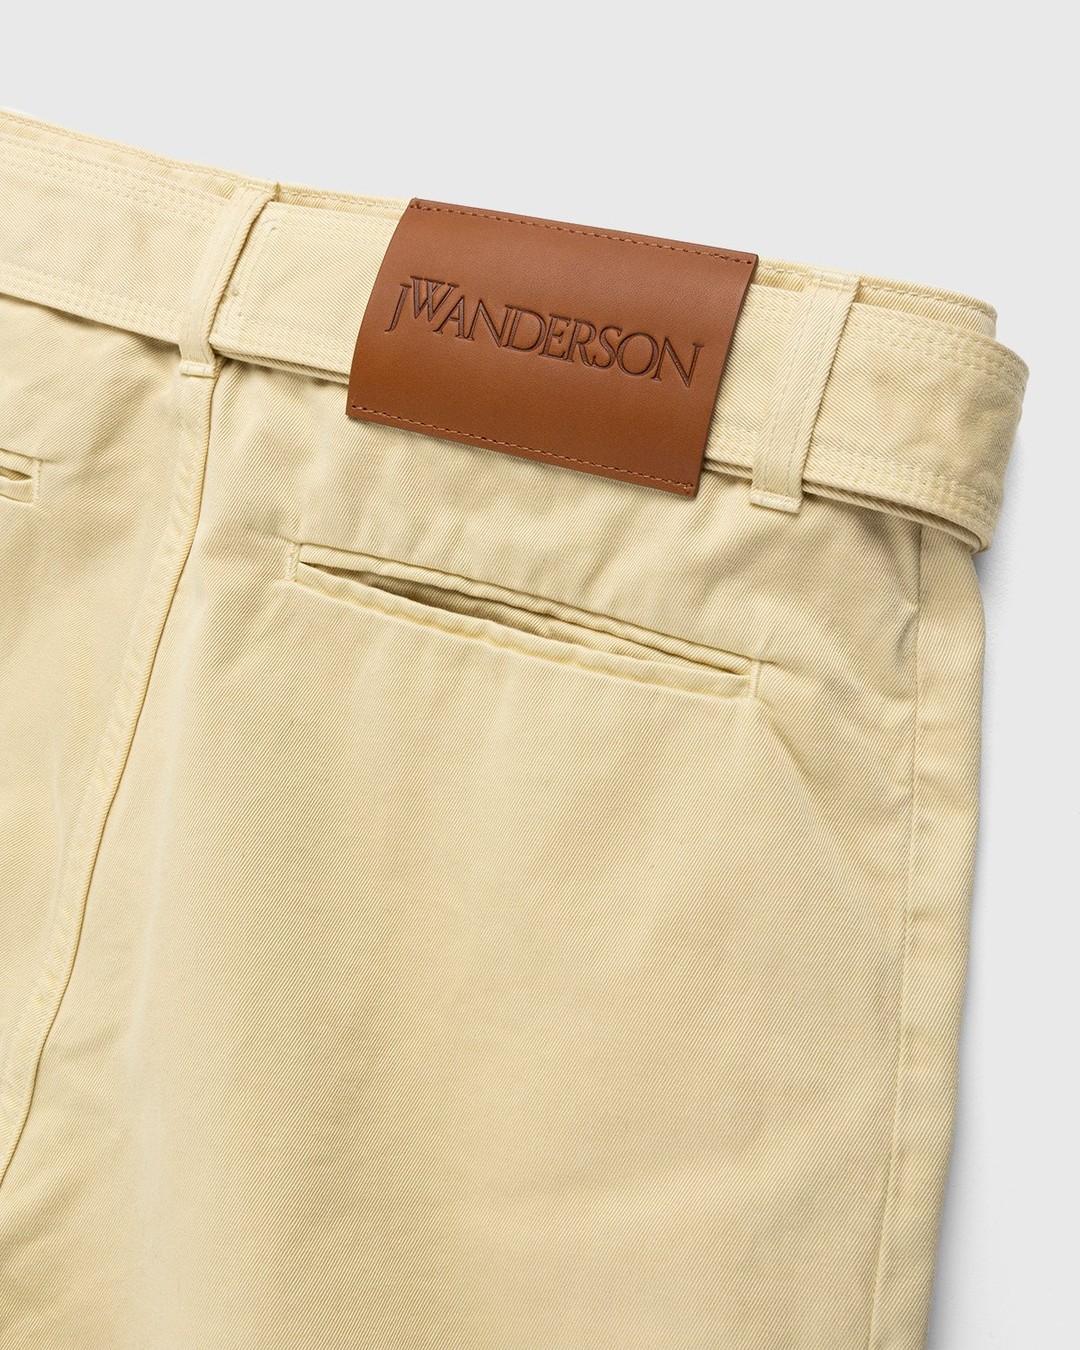 J.W. Anderson – Strawberry Chino Shorts Natural/Red - Shorts - Beige - Image 3